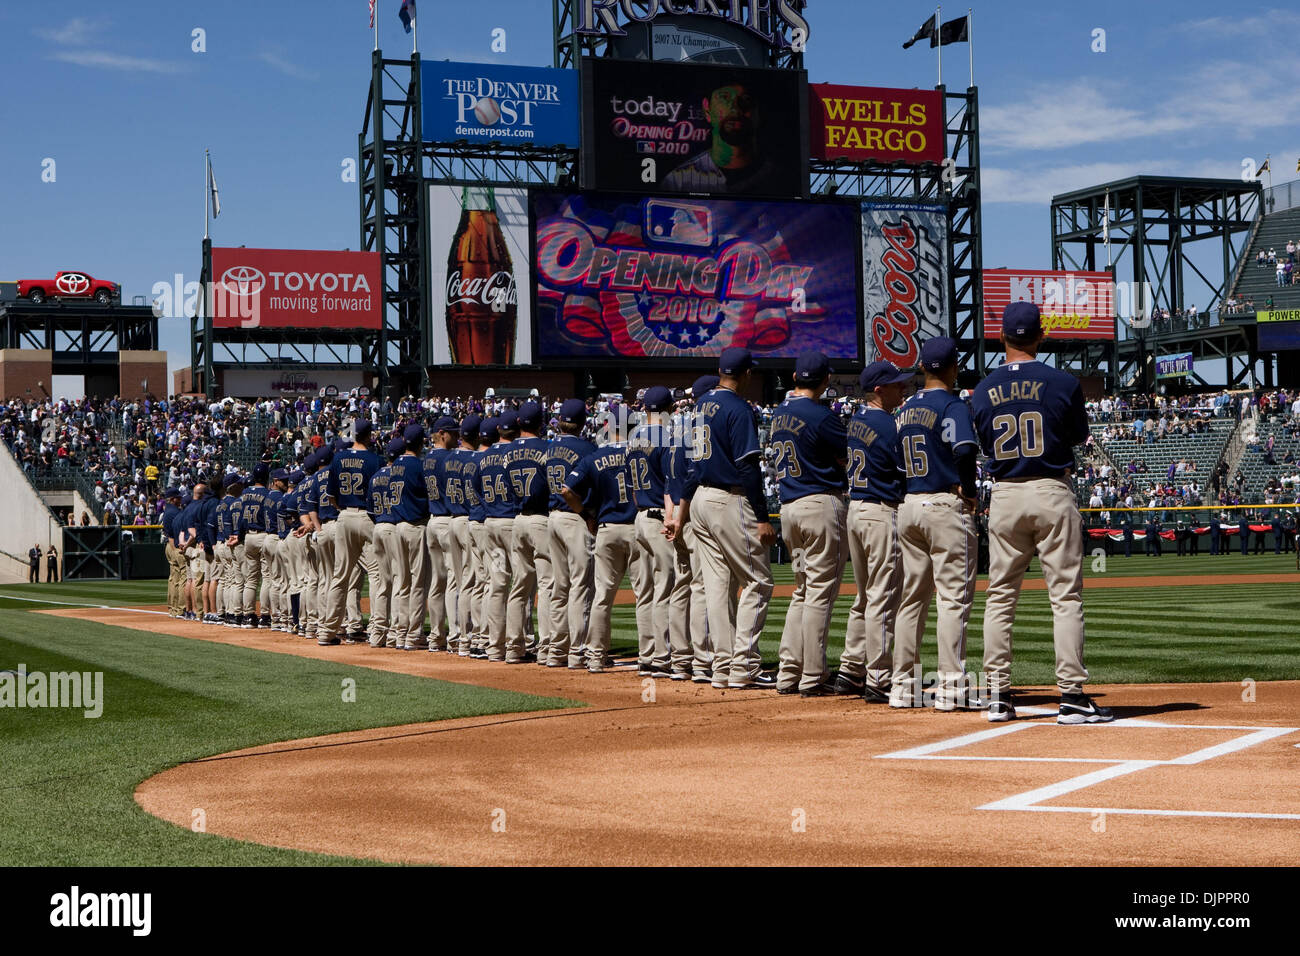 Apr 9, 2010 - Denver, Colorado, USA - The San Diego Padres line up during pre-game ceremonies for The Colorado Rockies Opening Day at Coors Field. The Rockies beat the Padres 7-0. (Credit Image: © Don Senia Murray/ZUMA Press) Stock Photo